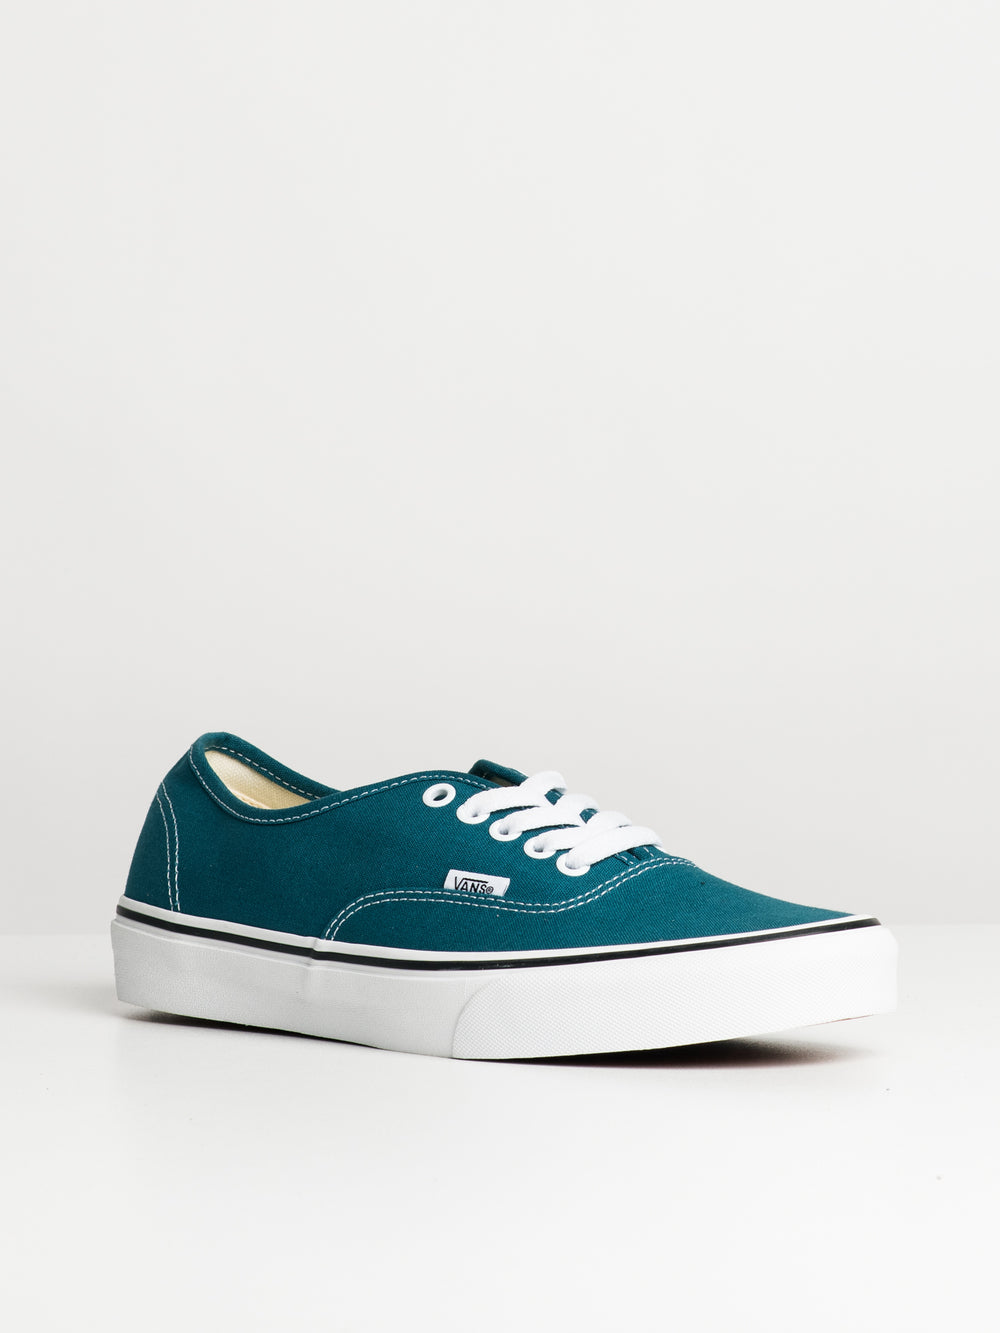 WOMENS VANS AUTHENTIC SNEAKER - CLEARANCE